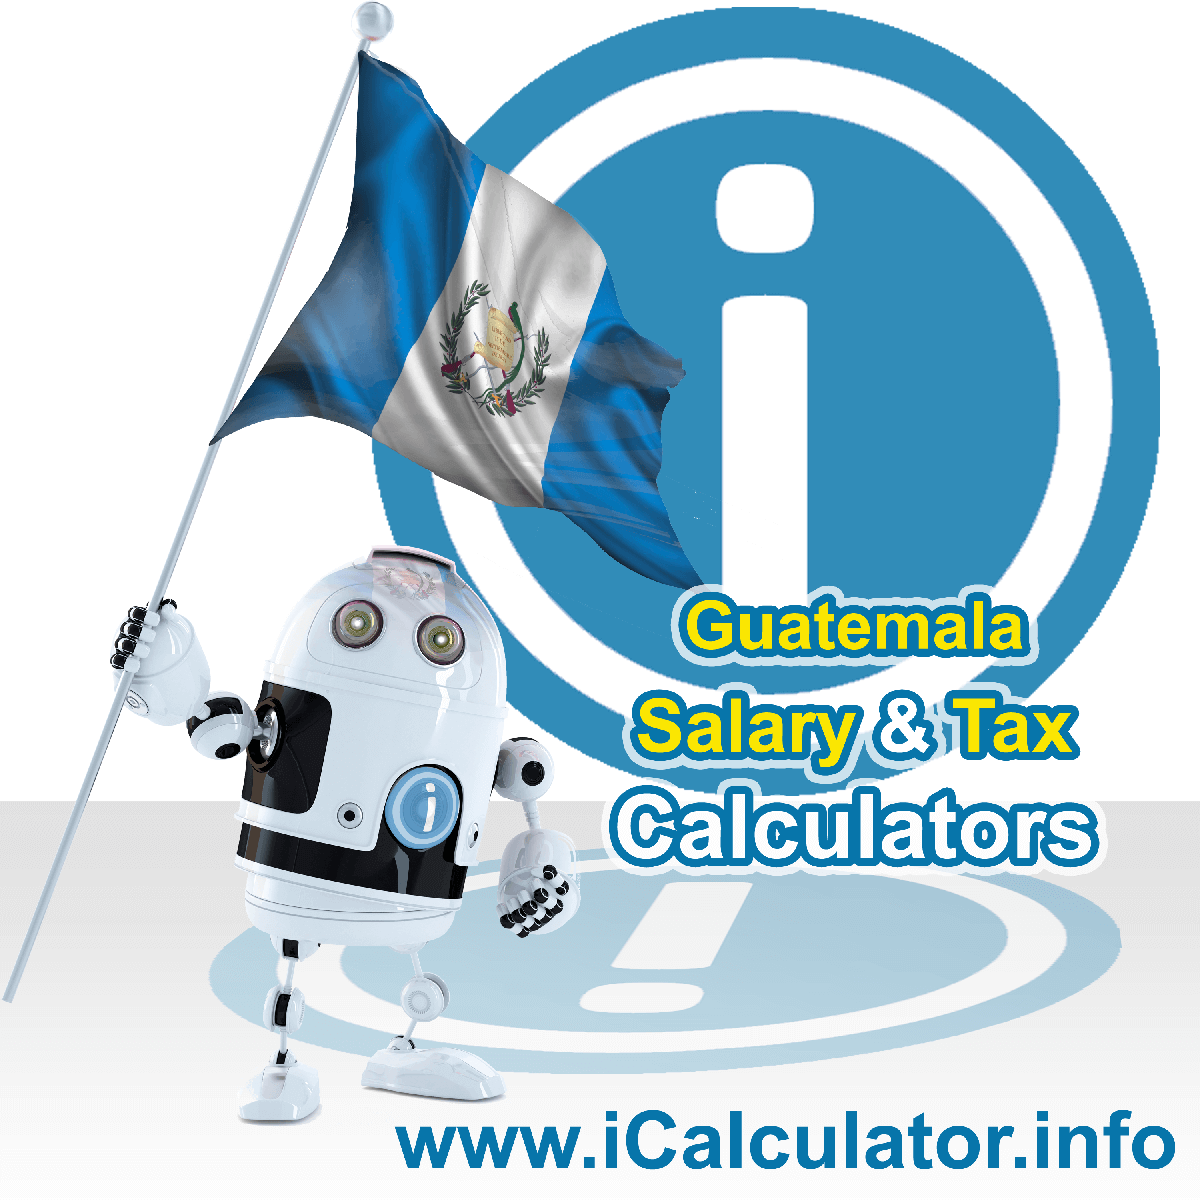 Guatemala Tax Calculator. This image shows the Guatemala flag and information relating to the tax formula for the Guatemala Salary Calculator